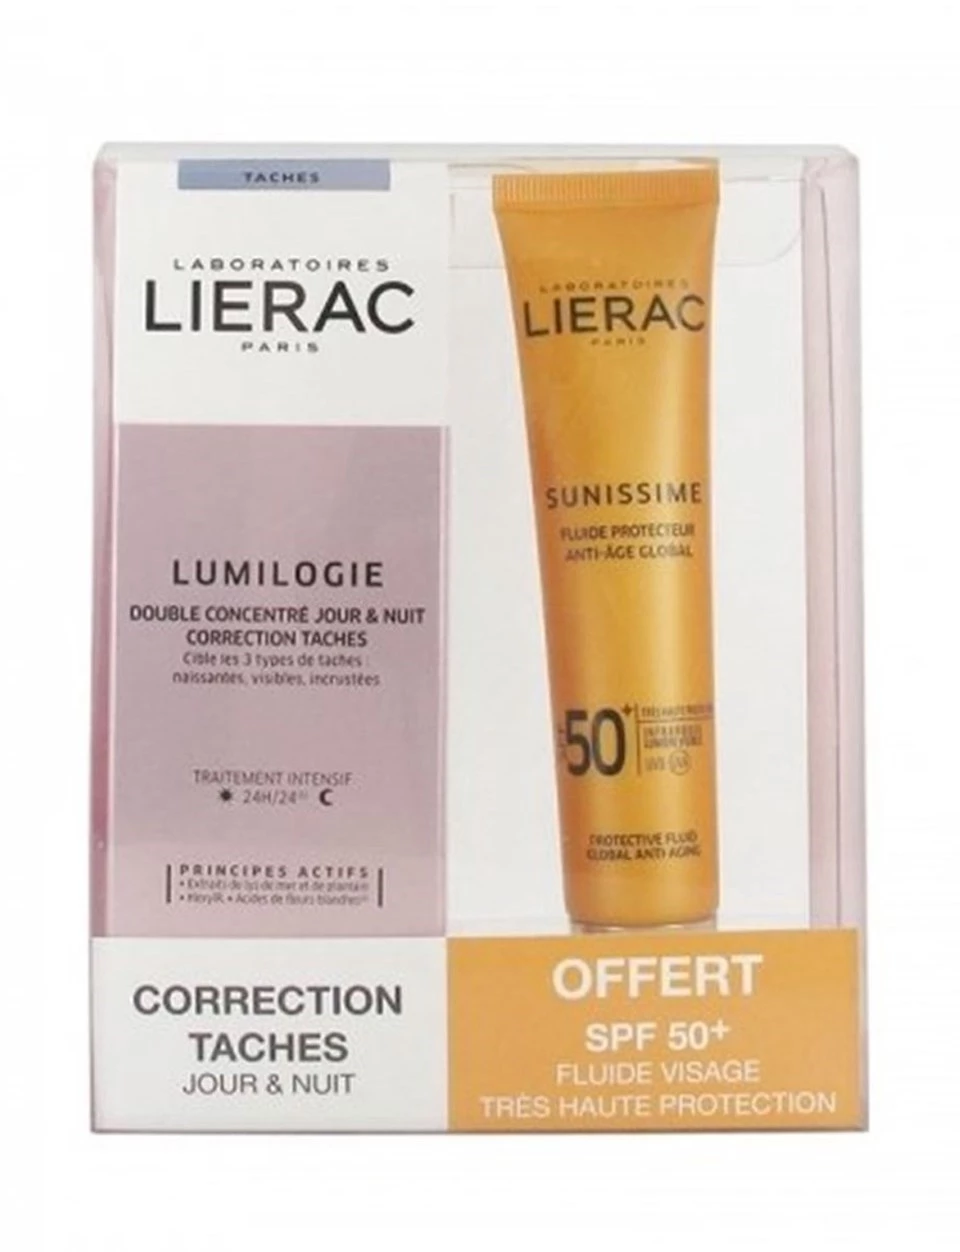 Lierac Lumilogie Correction Taches Day And Night +Sunnissime SPF 50 +40 ml